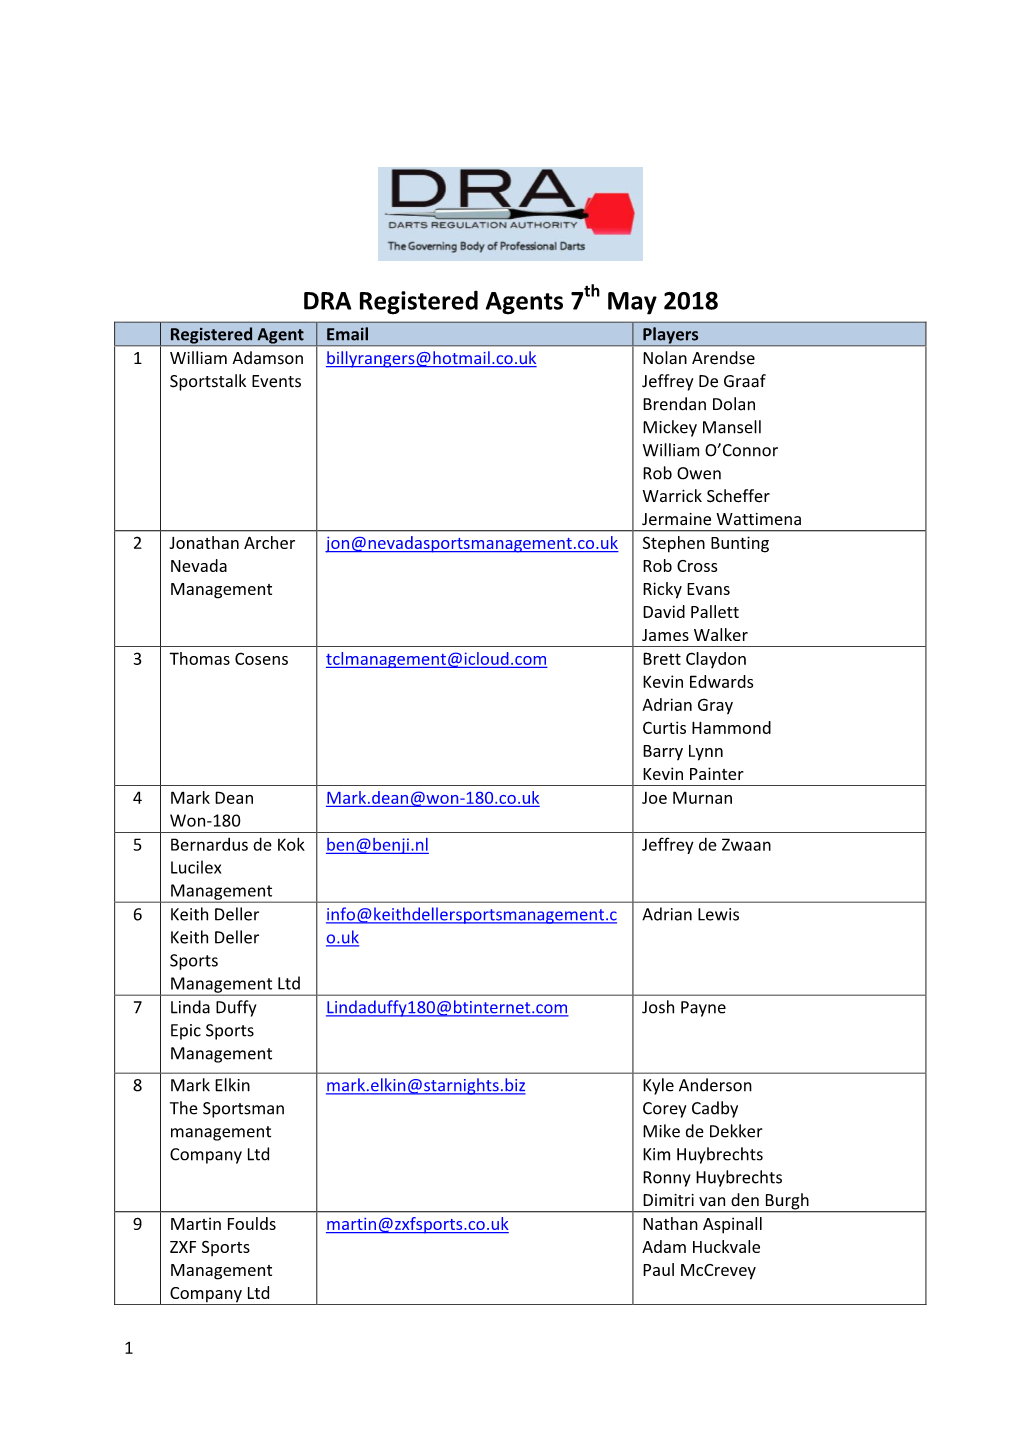 DRA Registered Agents 7 May 2018